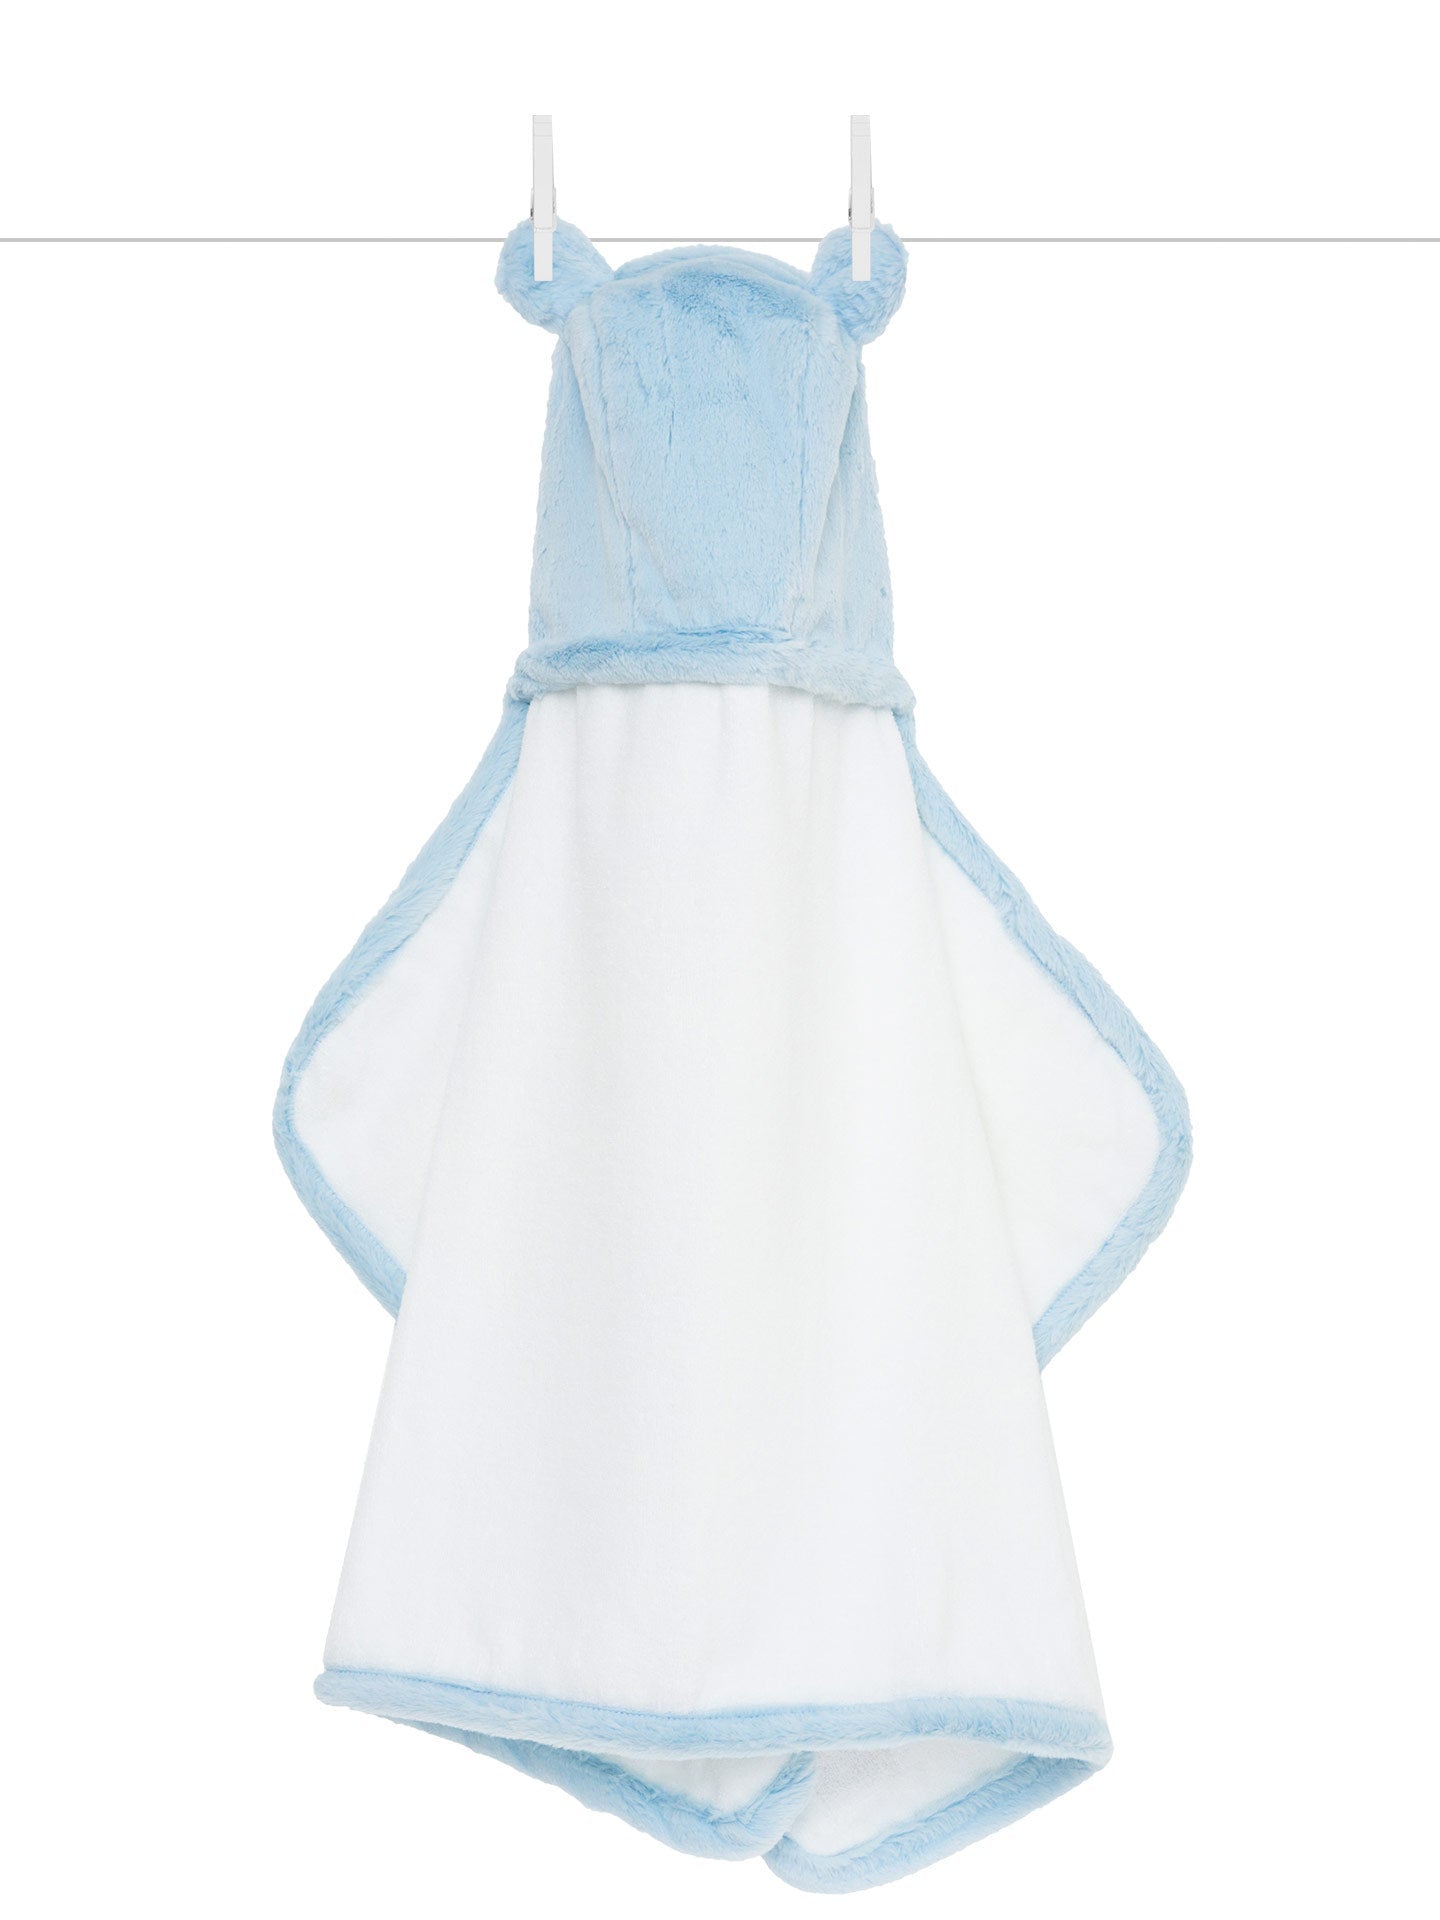 Luxe Hooded Towel - Blue